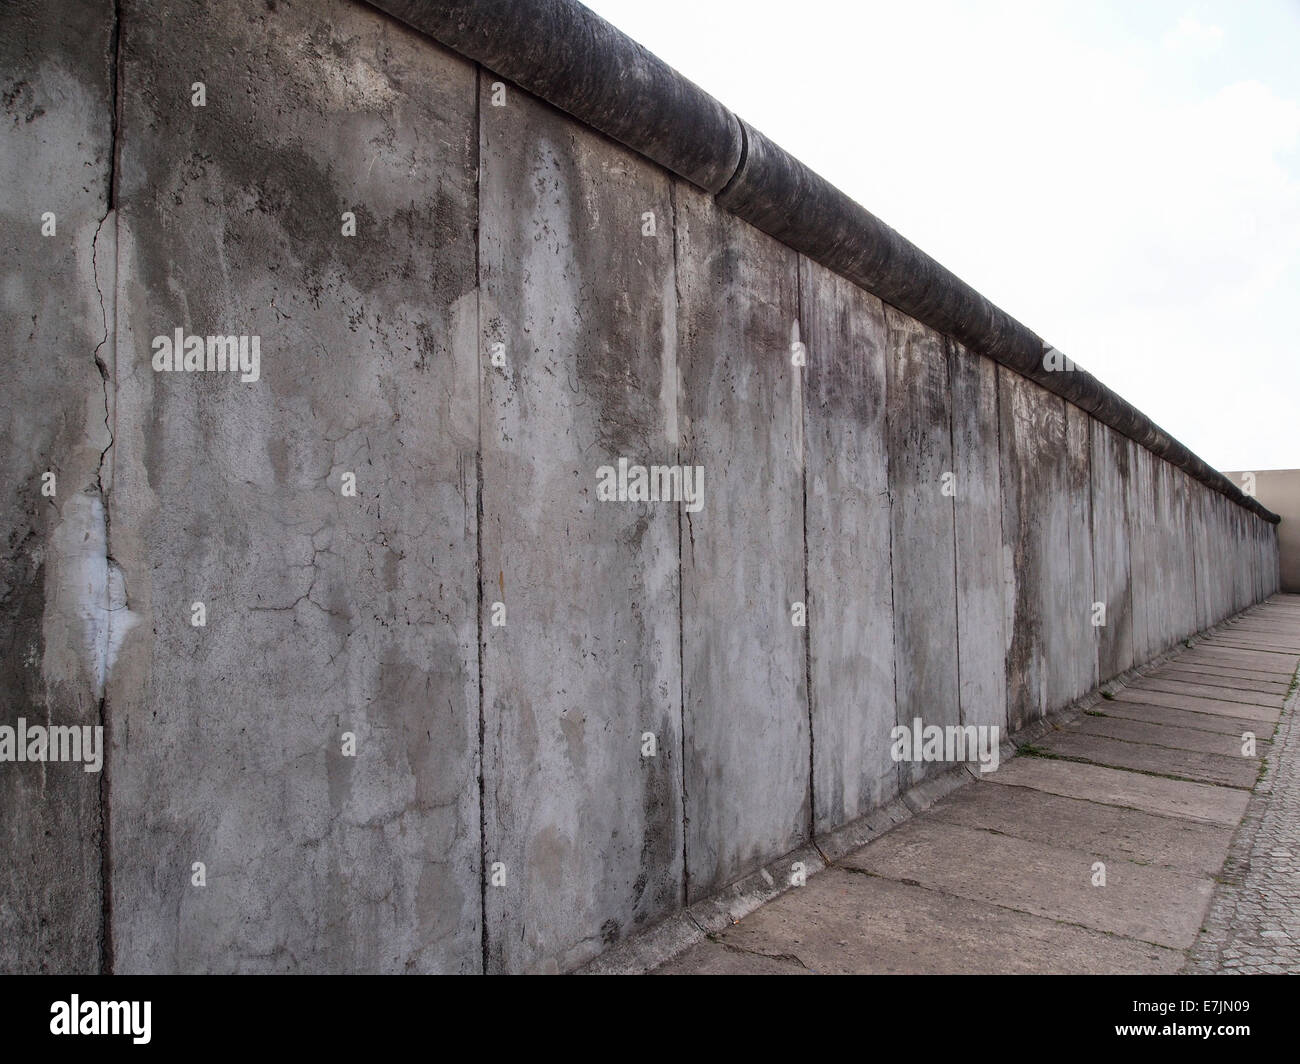 An original part of the Berlin wall that once divided East from West Berlin that has been preserved as 'Berlin wall memorial' Stock Photo